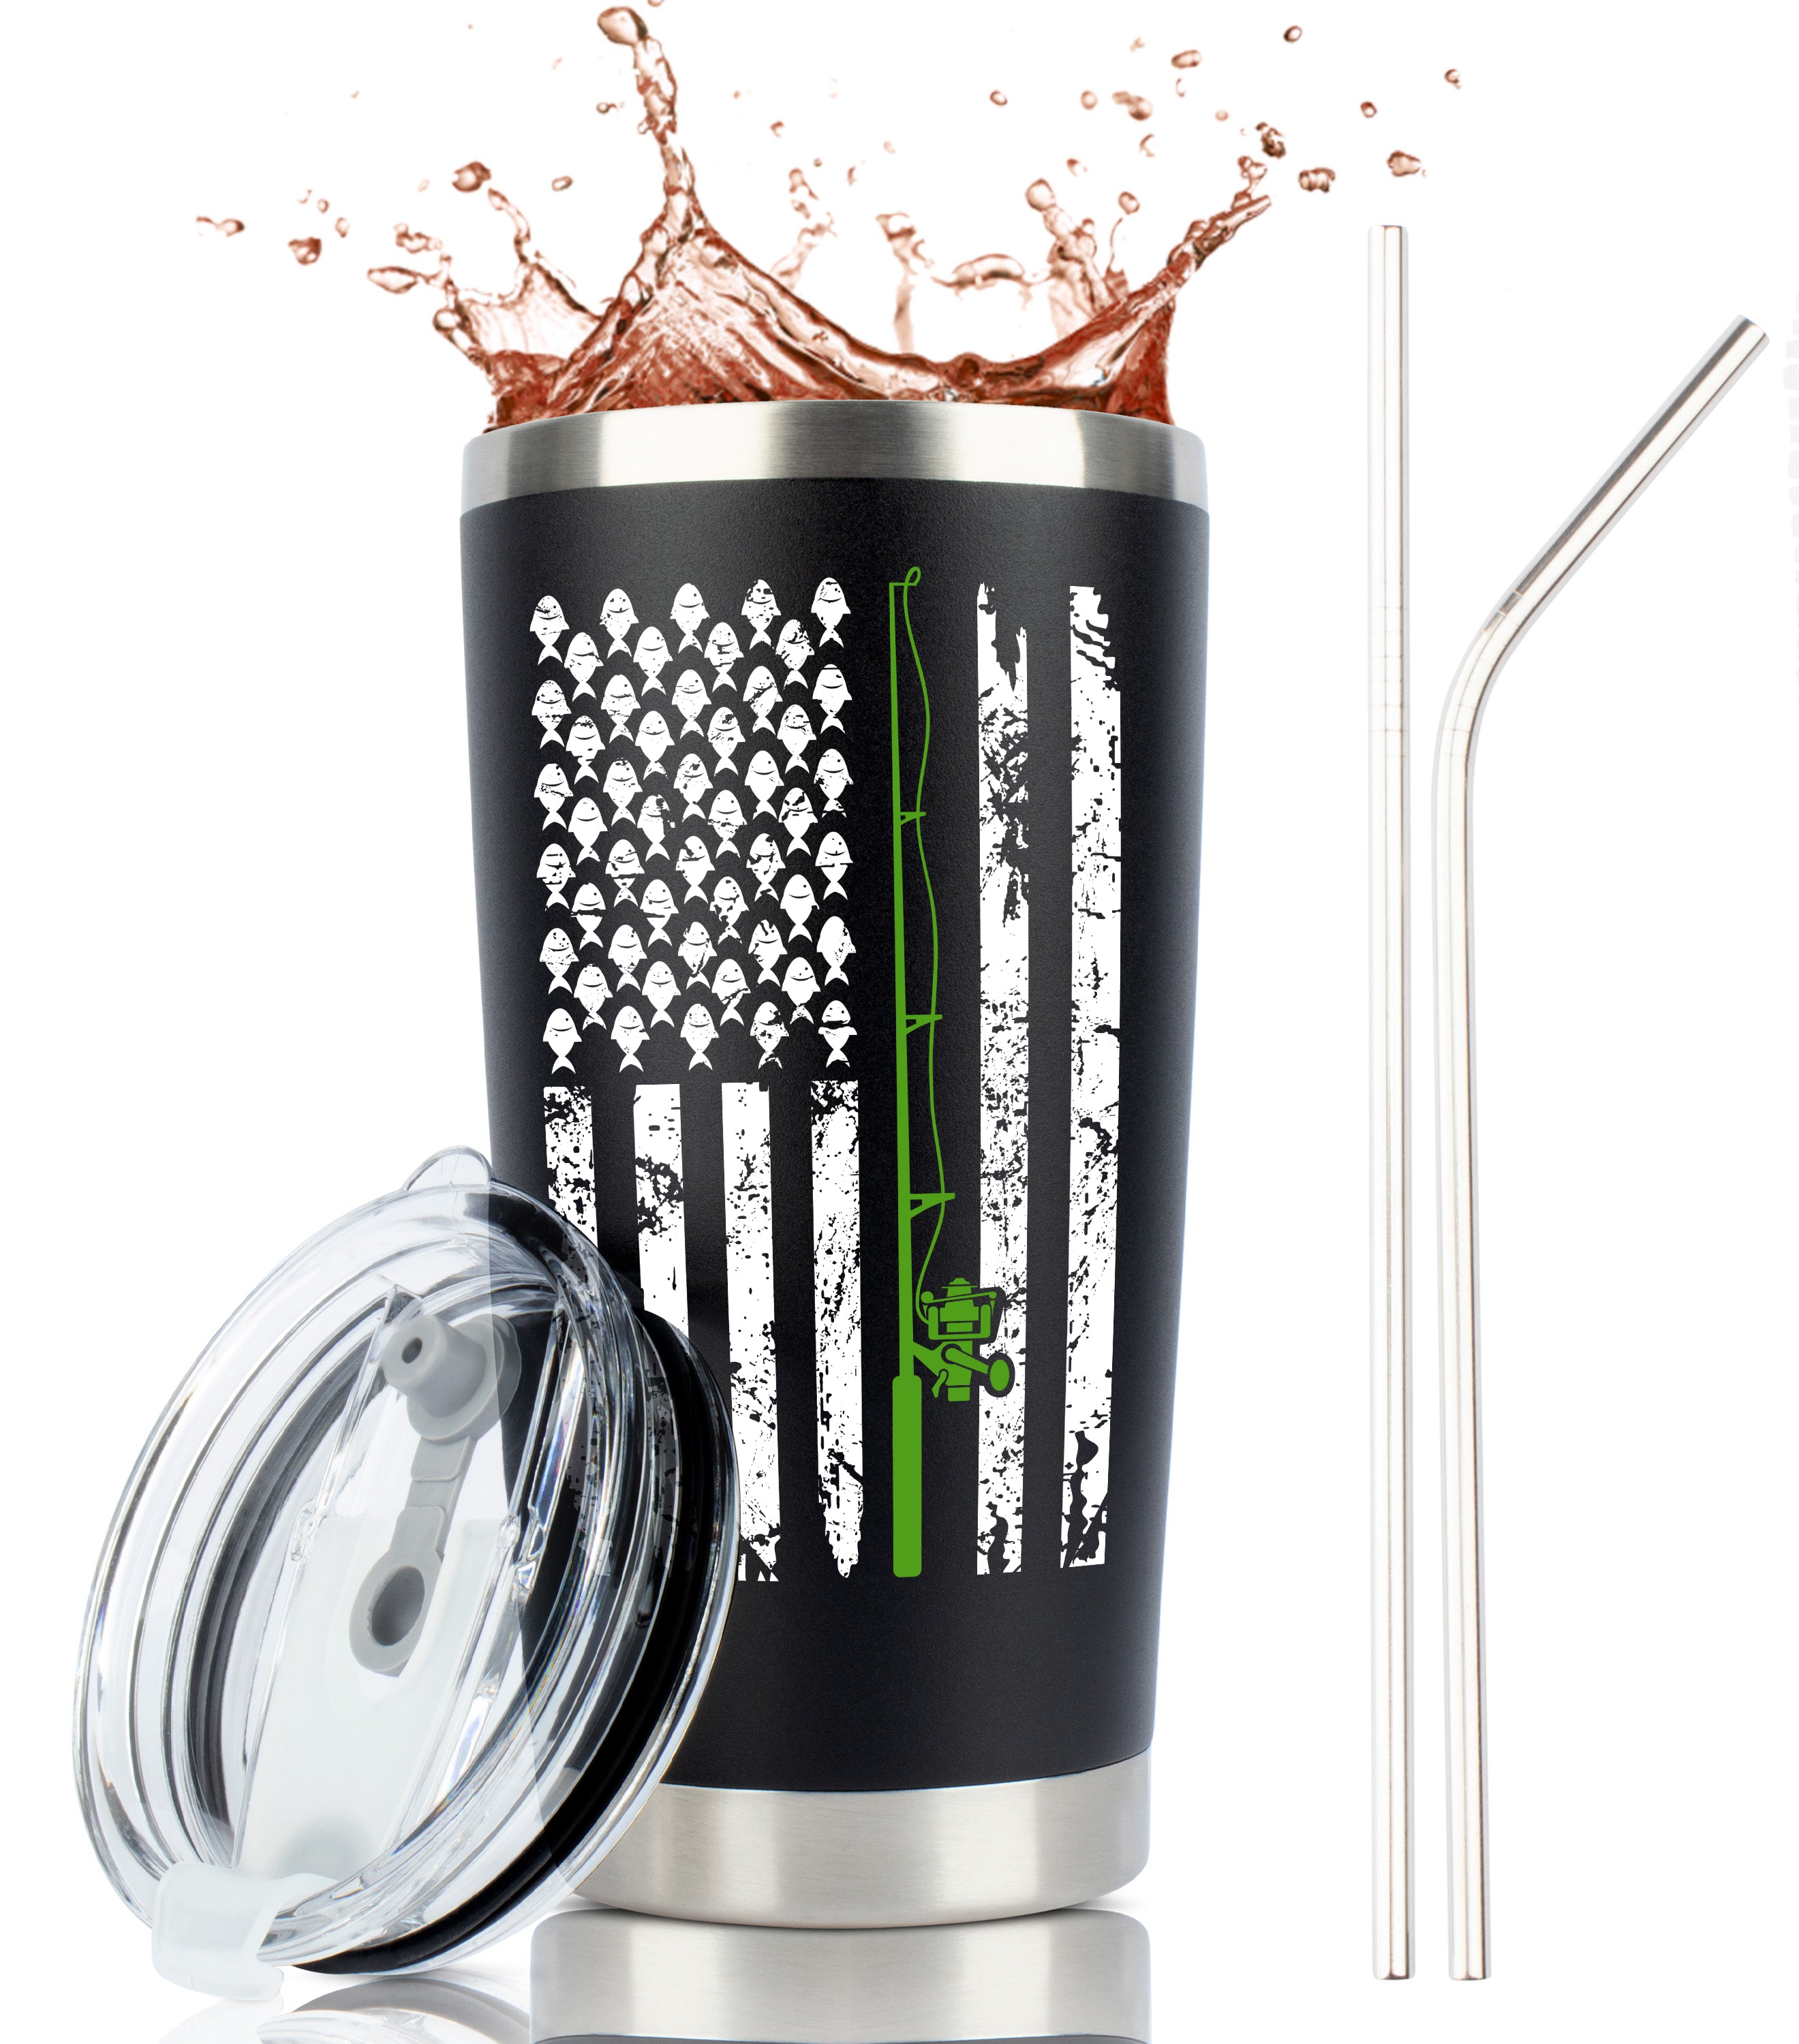 NewYT Fishing Gifts for Men - Stainless Steel American Flag